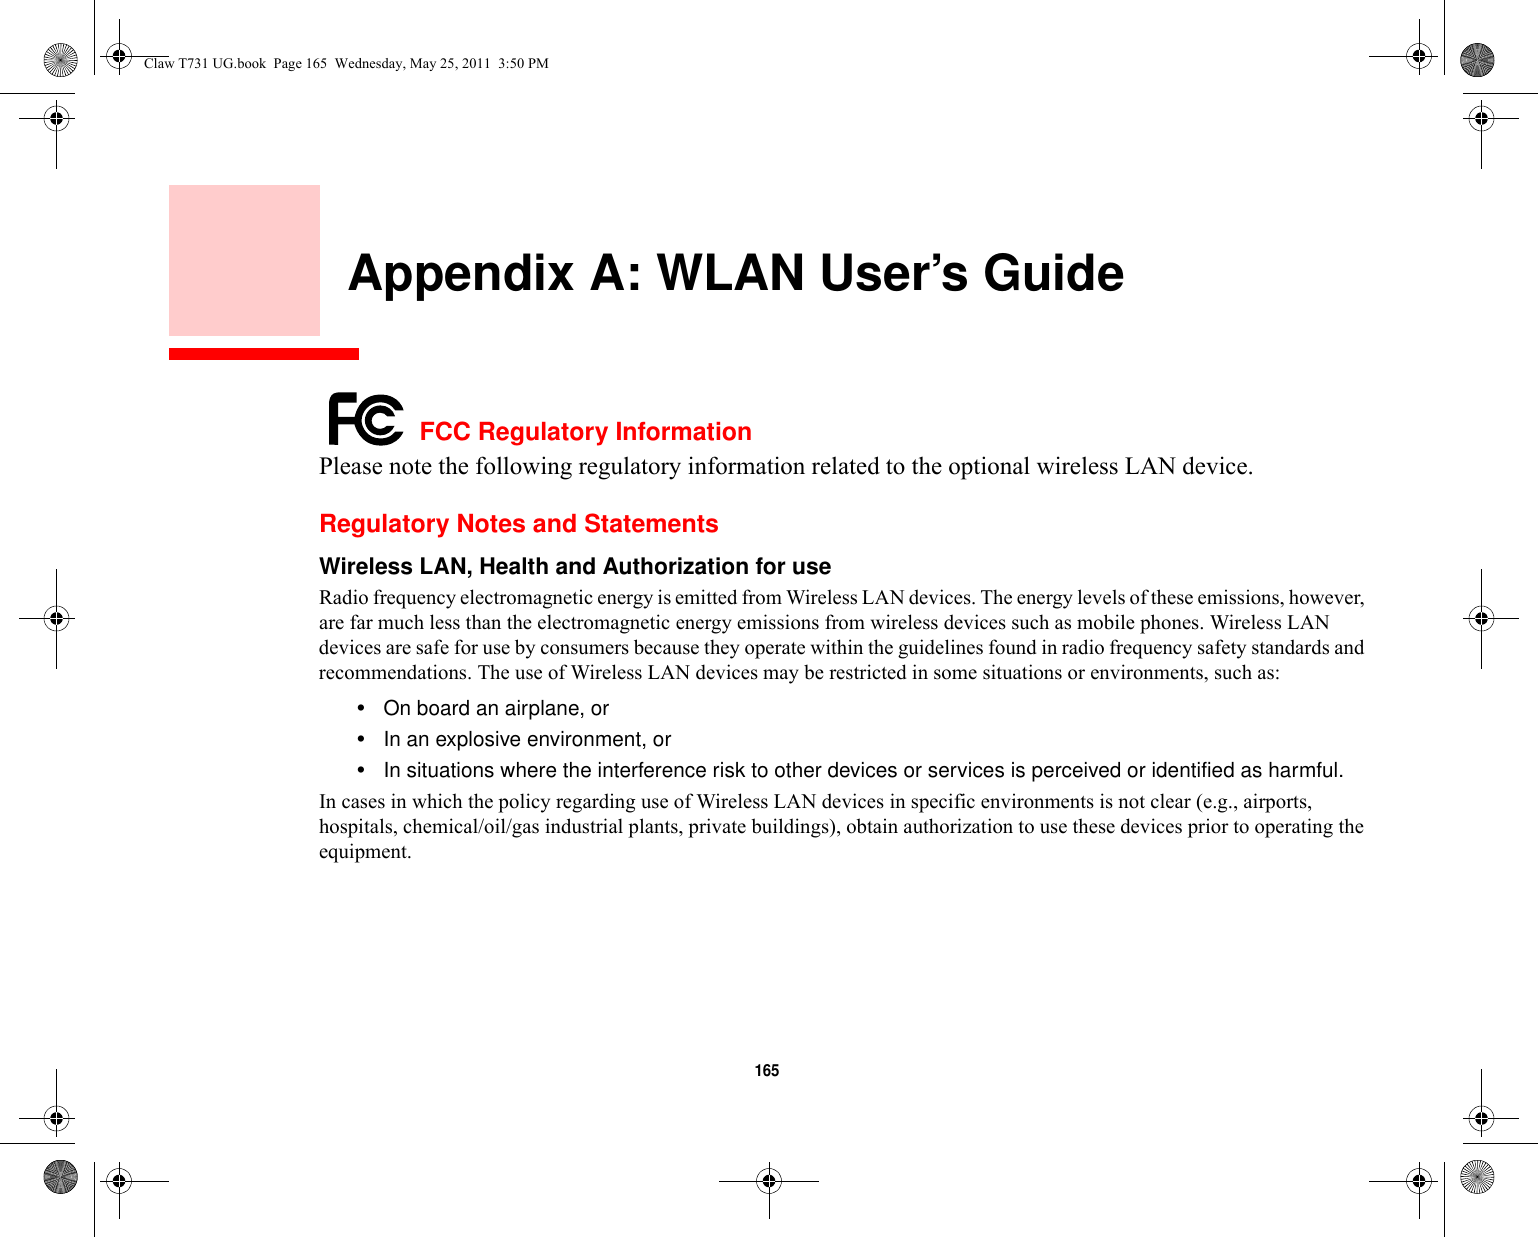 165     Appendix A: WLAN User’s Guide FCC Regulatory InformationPlease note the following regulatory information related to the optional wireless LAN device.Regulatory Notes and StatementsWireless LAN, Health and Authorization for use  Radio frequency electromagnetic energy is emitted from Wireless LAN devices. The energy levels of these emissions, however, are far much less than the electromagnetic energy emissions from wireless devices such as mobile phones. Wireless LAN devices are safe for use by consumers because they operate within the guidelines found in radio frequency safety standards and recommendations. The use of Wireless LAN devices may be restricted in some situations or environments, such as:•On board an airplane, or•In an explosive environment, or•In situations where the interference risk to other devices or services is perceived or identified as harmful.In cases in which the policy regarding use of Wireless LAN devices in specific environments is not clear (e.g., airports, hospitals, chemical/oil/gas industrial plants, private buildings), obtain authorization to use these devices prior to operating the equipment.Claw T731 UG.book  Page 165  Wednesday, May 25, 2011  3:50 PM